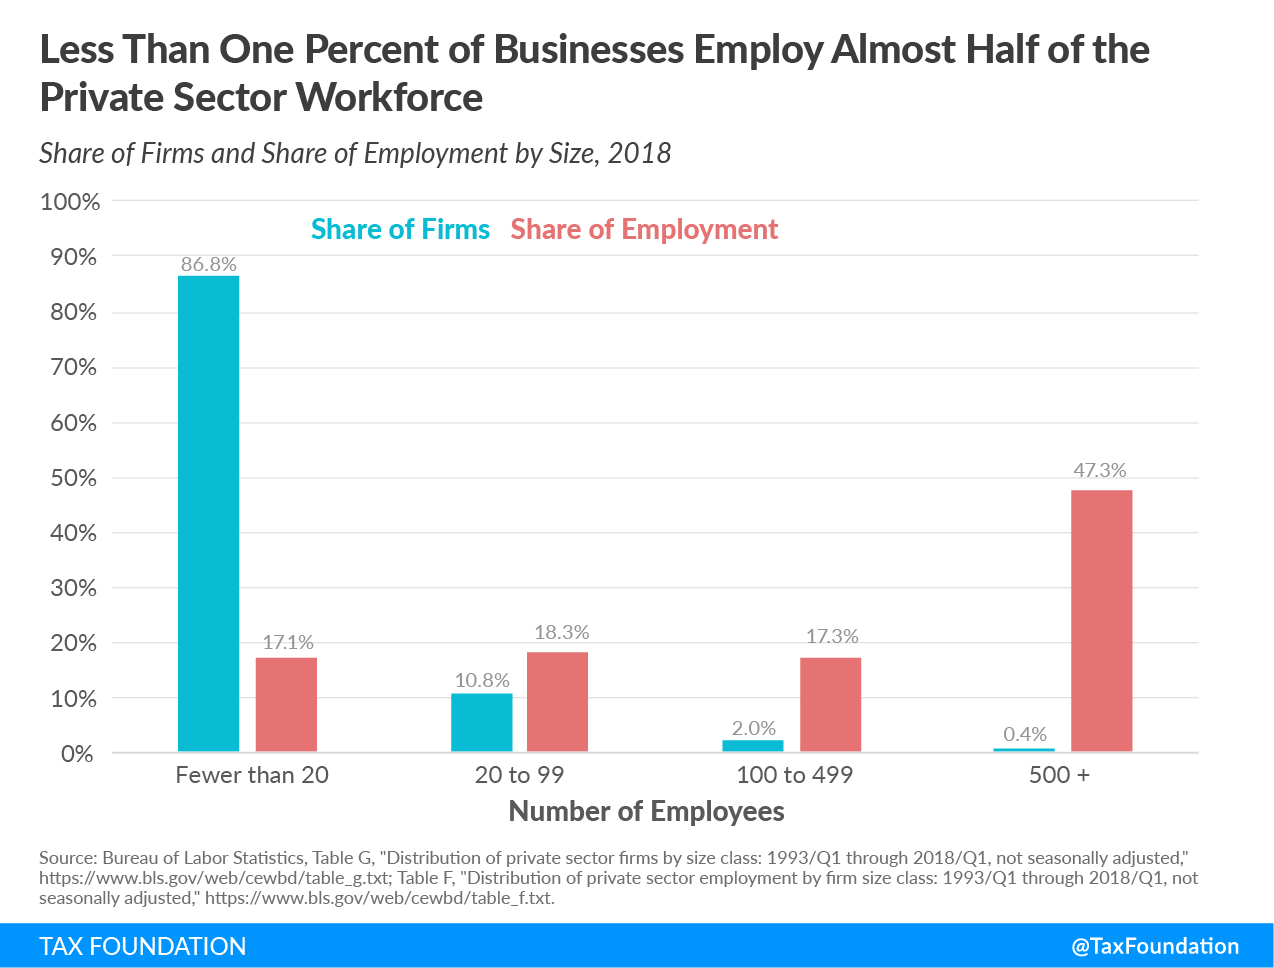 Less than one percent of businesses employ almost half of the private sector workforce